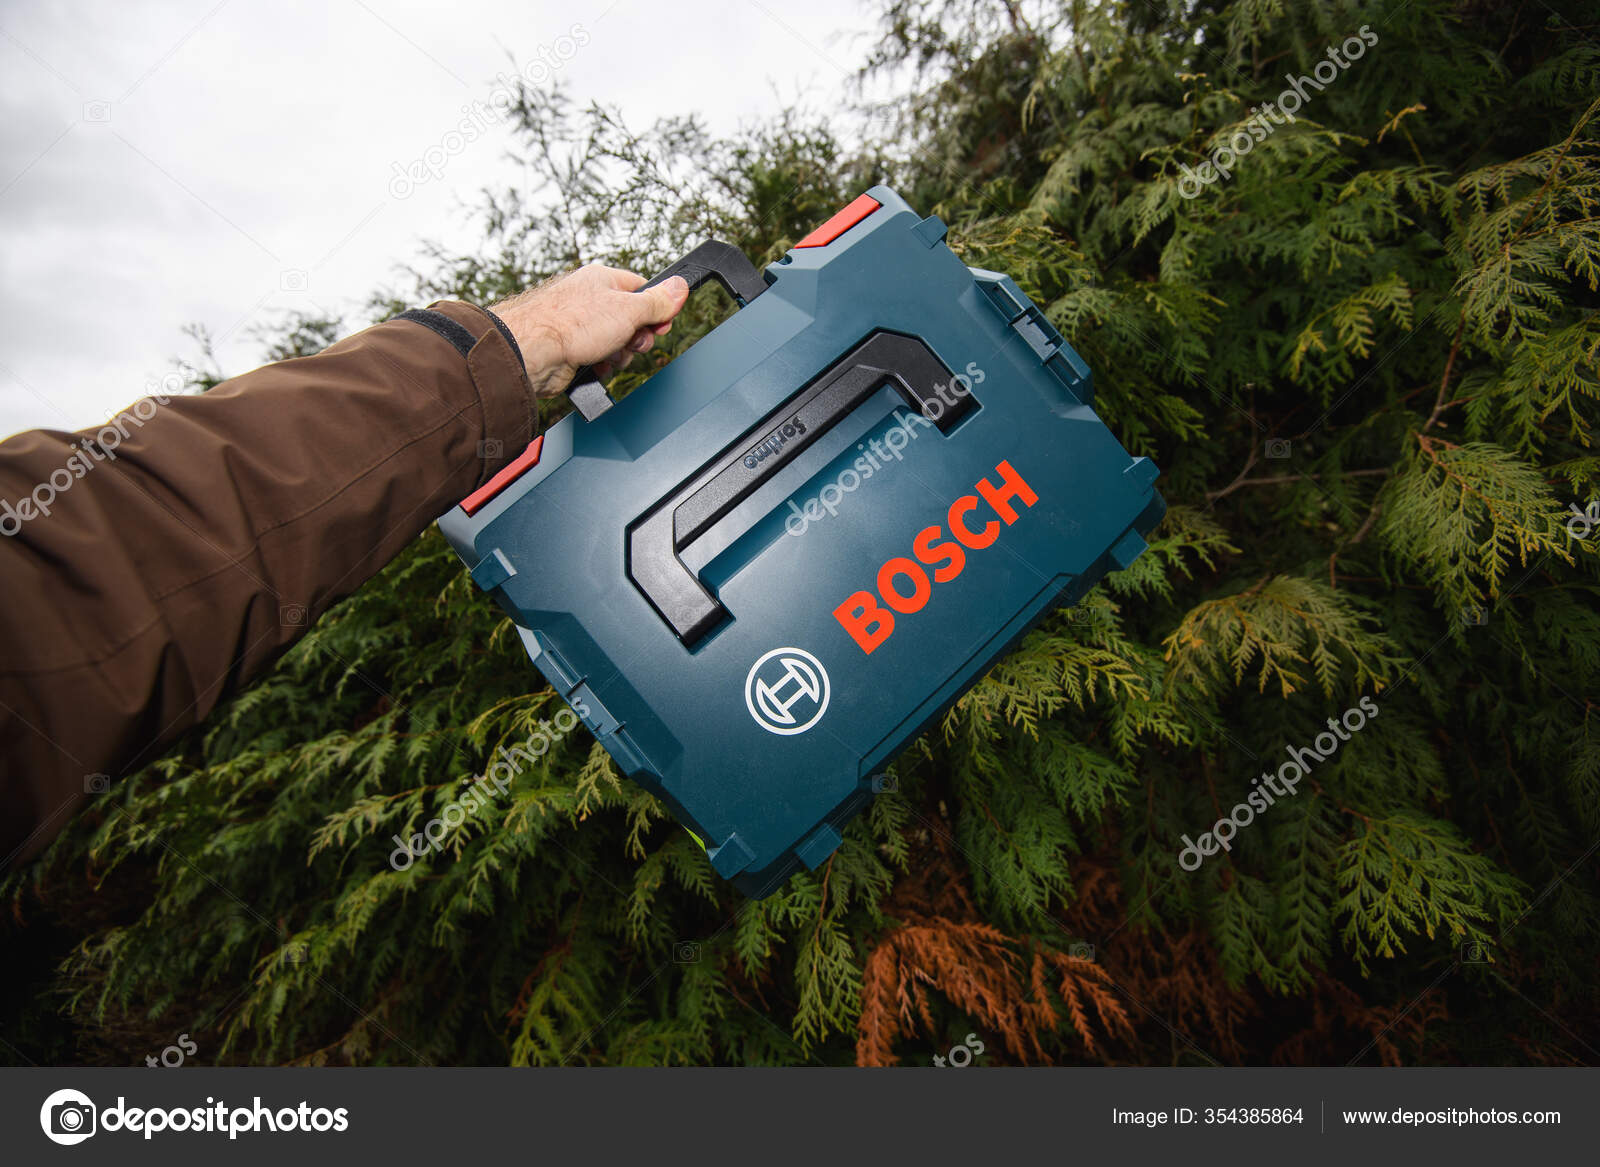 Bosch Professional Power Tools and Accessories - Bosch L-Boxx